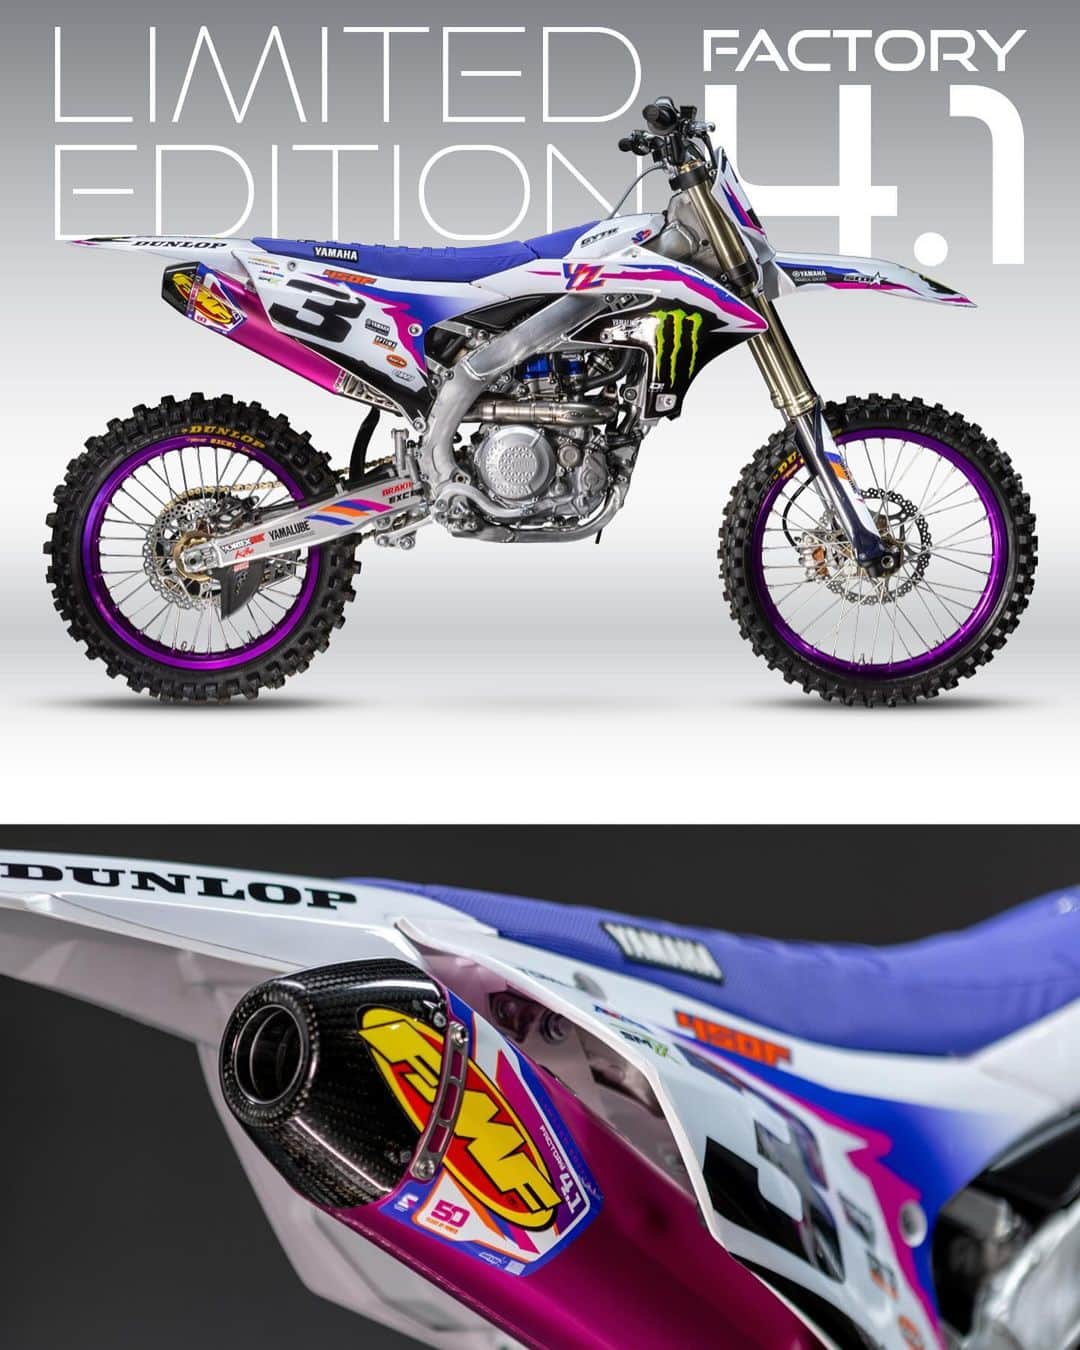 Racer X Onlineのインスタグラム：「@fmf73 Limited Edition Metal Works launches their ultra exclusive Factory Yamaha Systems. Only 25 of each 250F and 450F systems are now available directly at FMFRacing.com. These are all that will ever be produced!  Developed in conjunction with STAR Factory Yamaha, each of these LE systems are laser etched and come with a signed Don Emler certificate of authenticity. Learn more today! Who will get #1? #partnership」